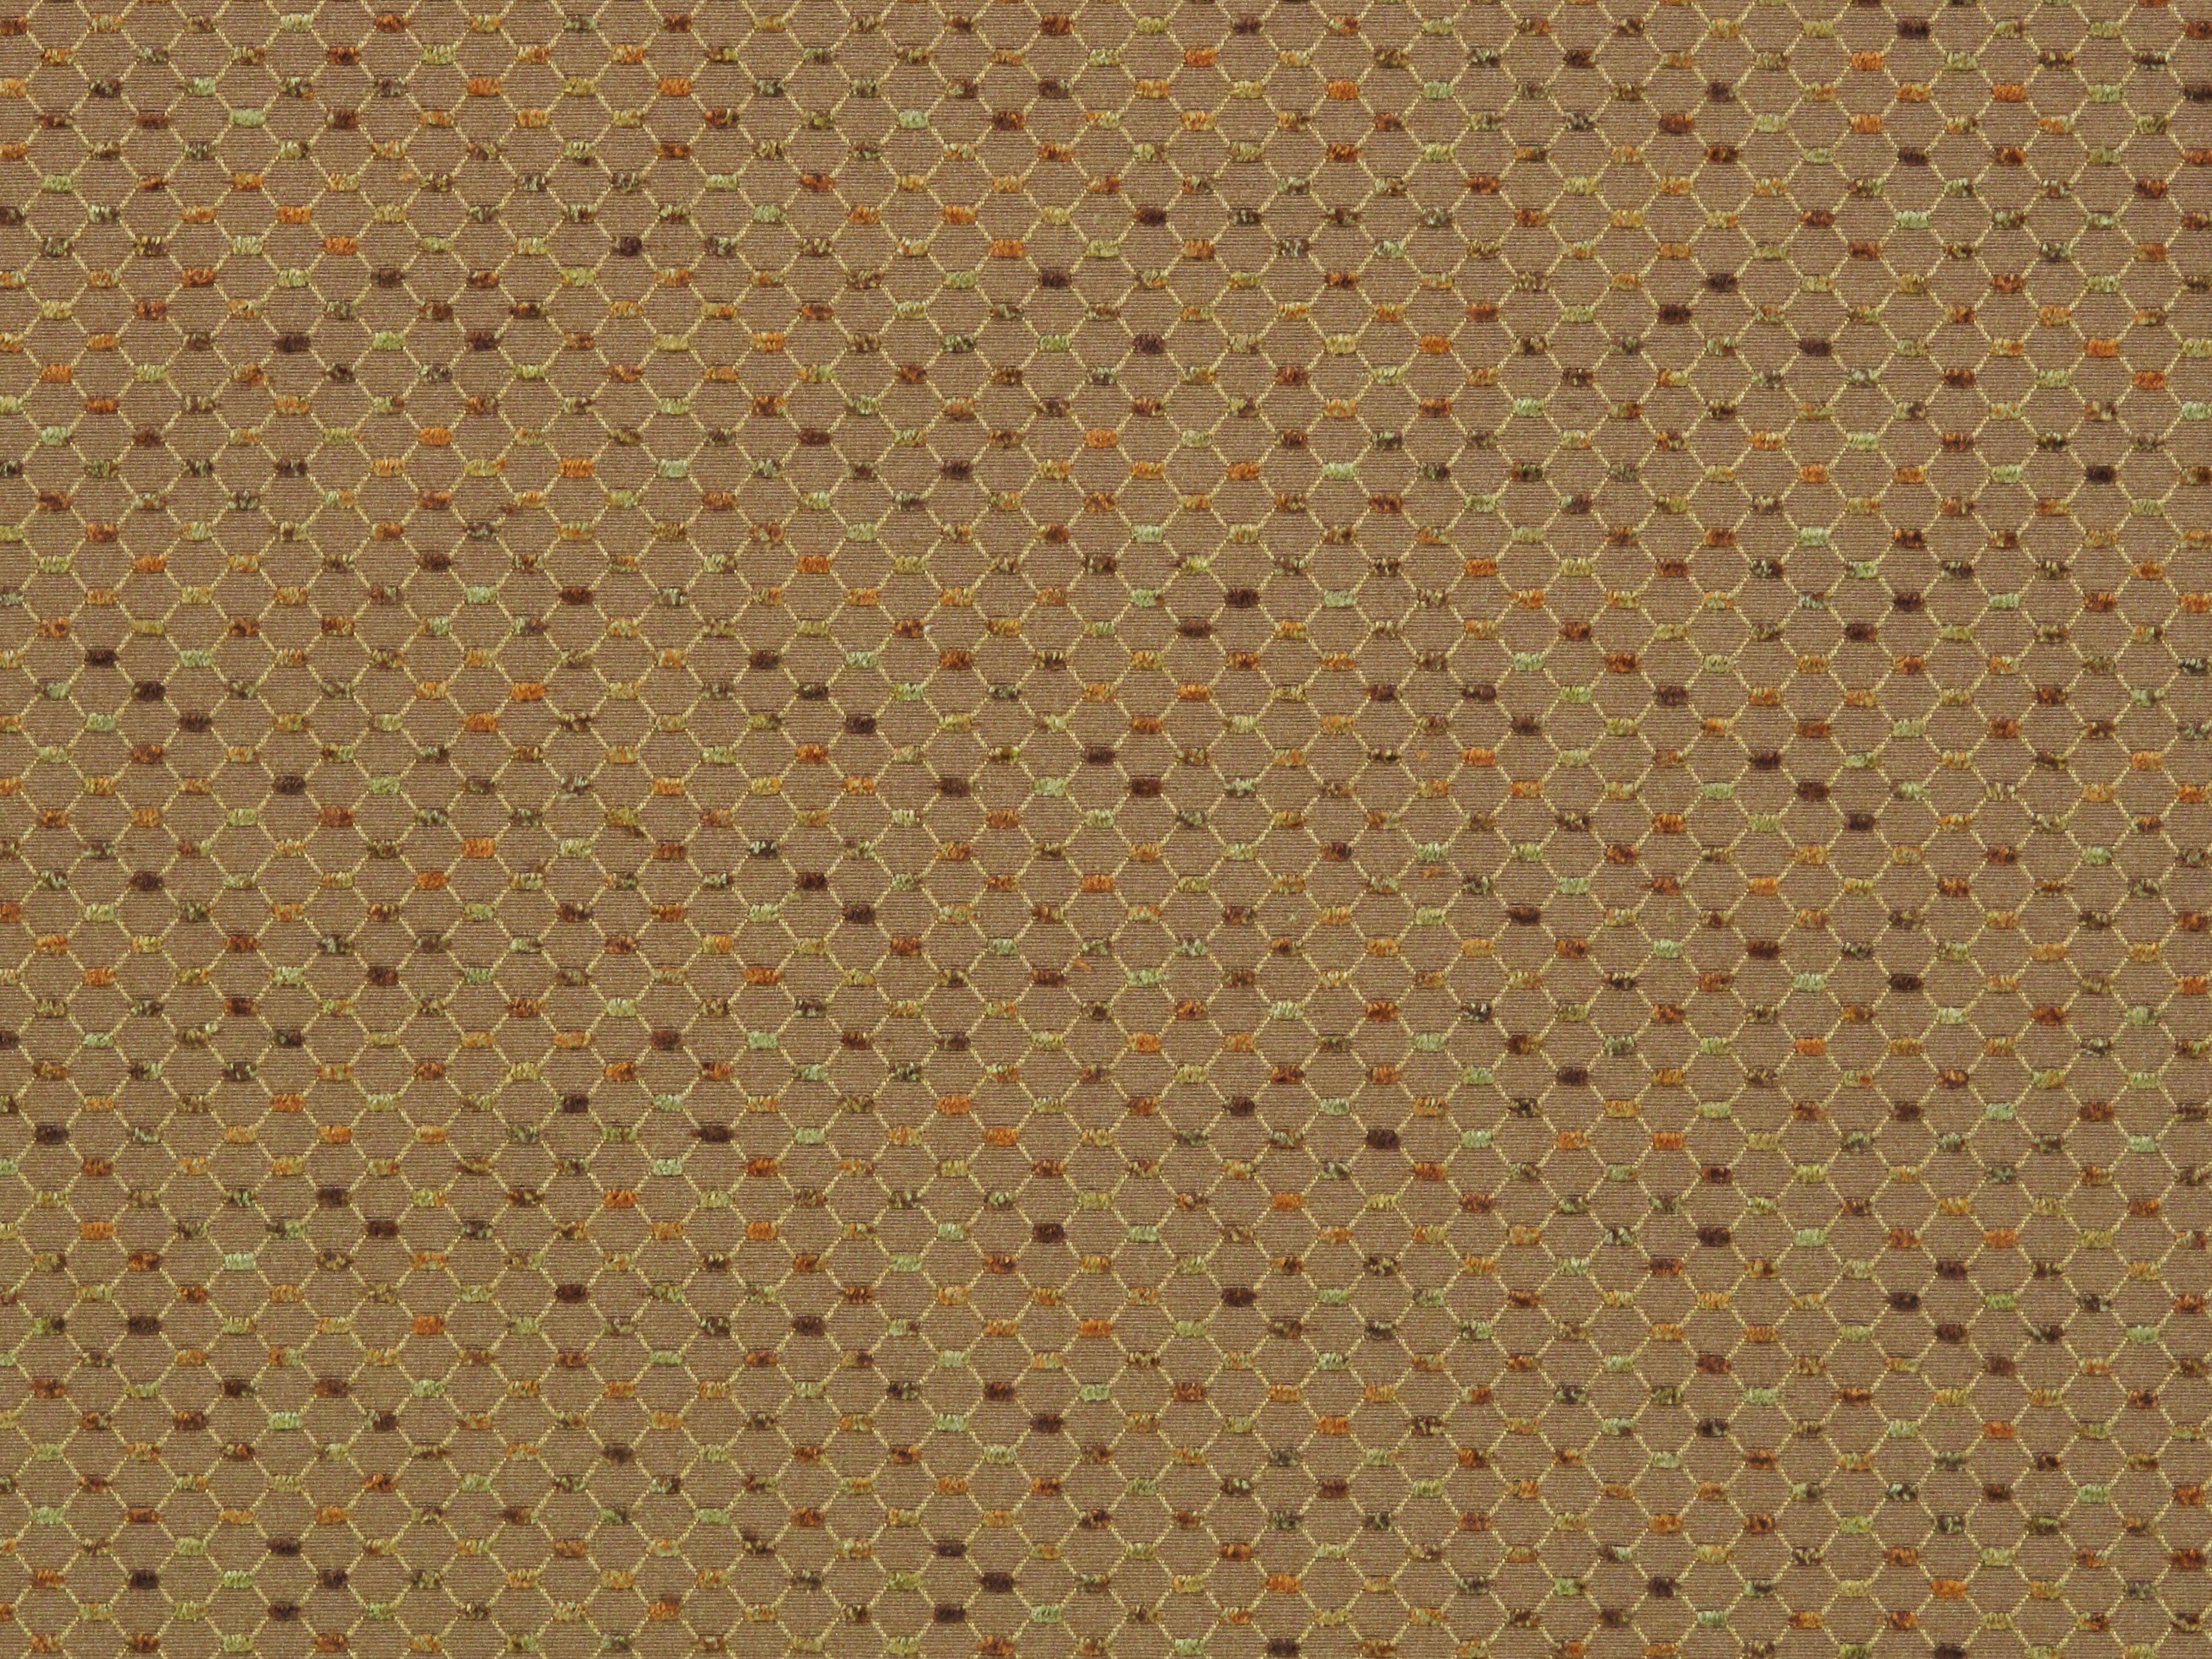 Arden fabric in woodland color - pattern number JC 0007UP80 - by Scalamandre in the Old World Weavers collection